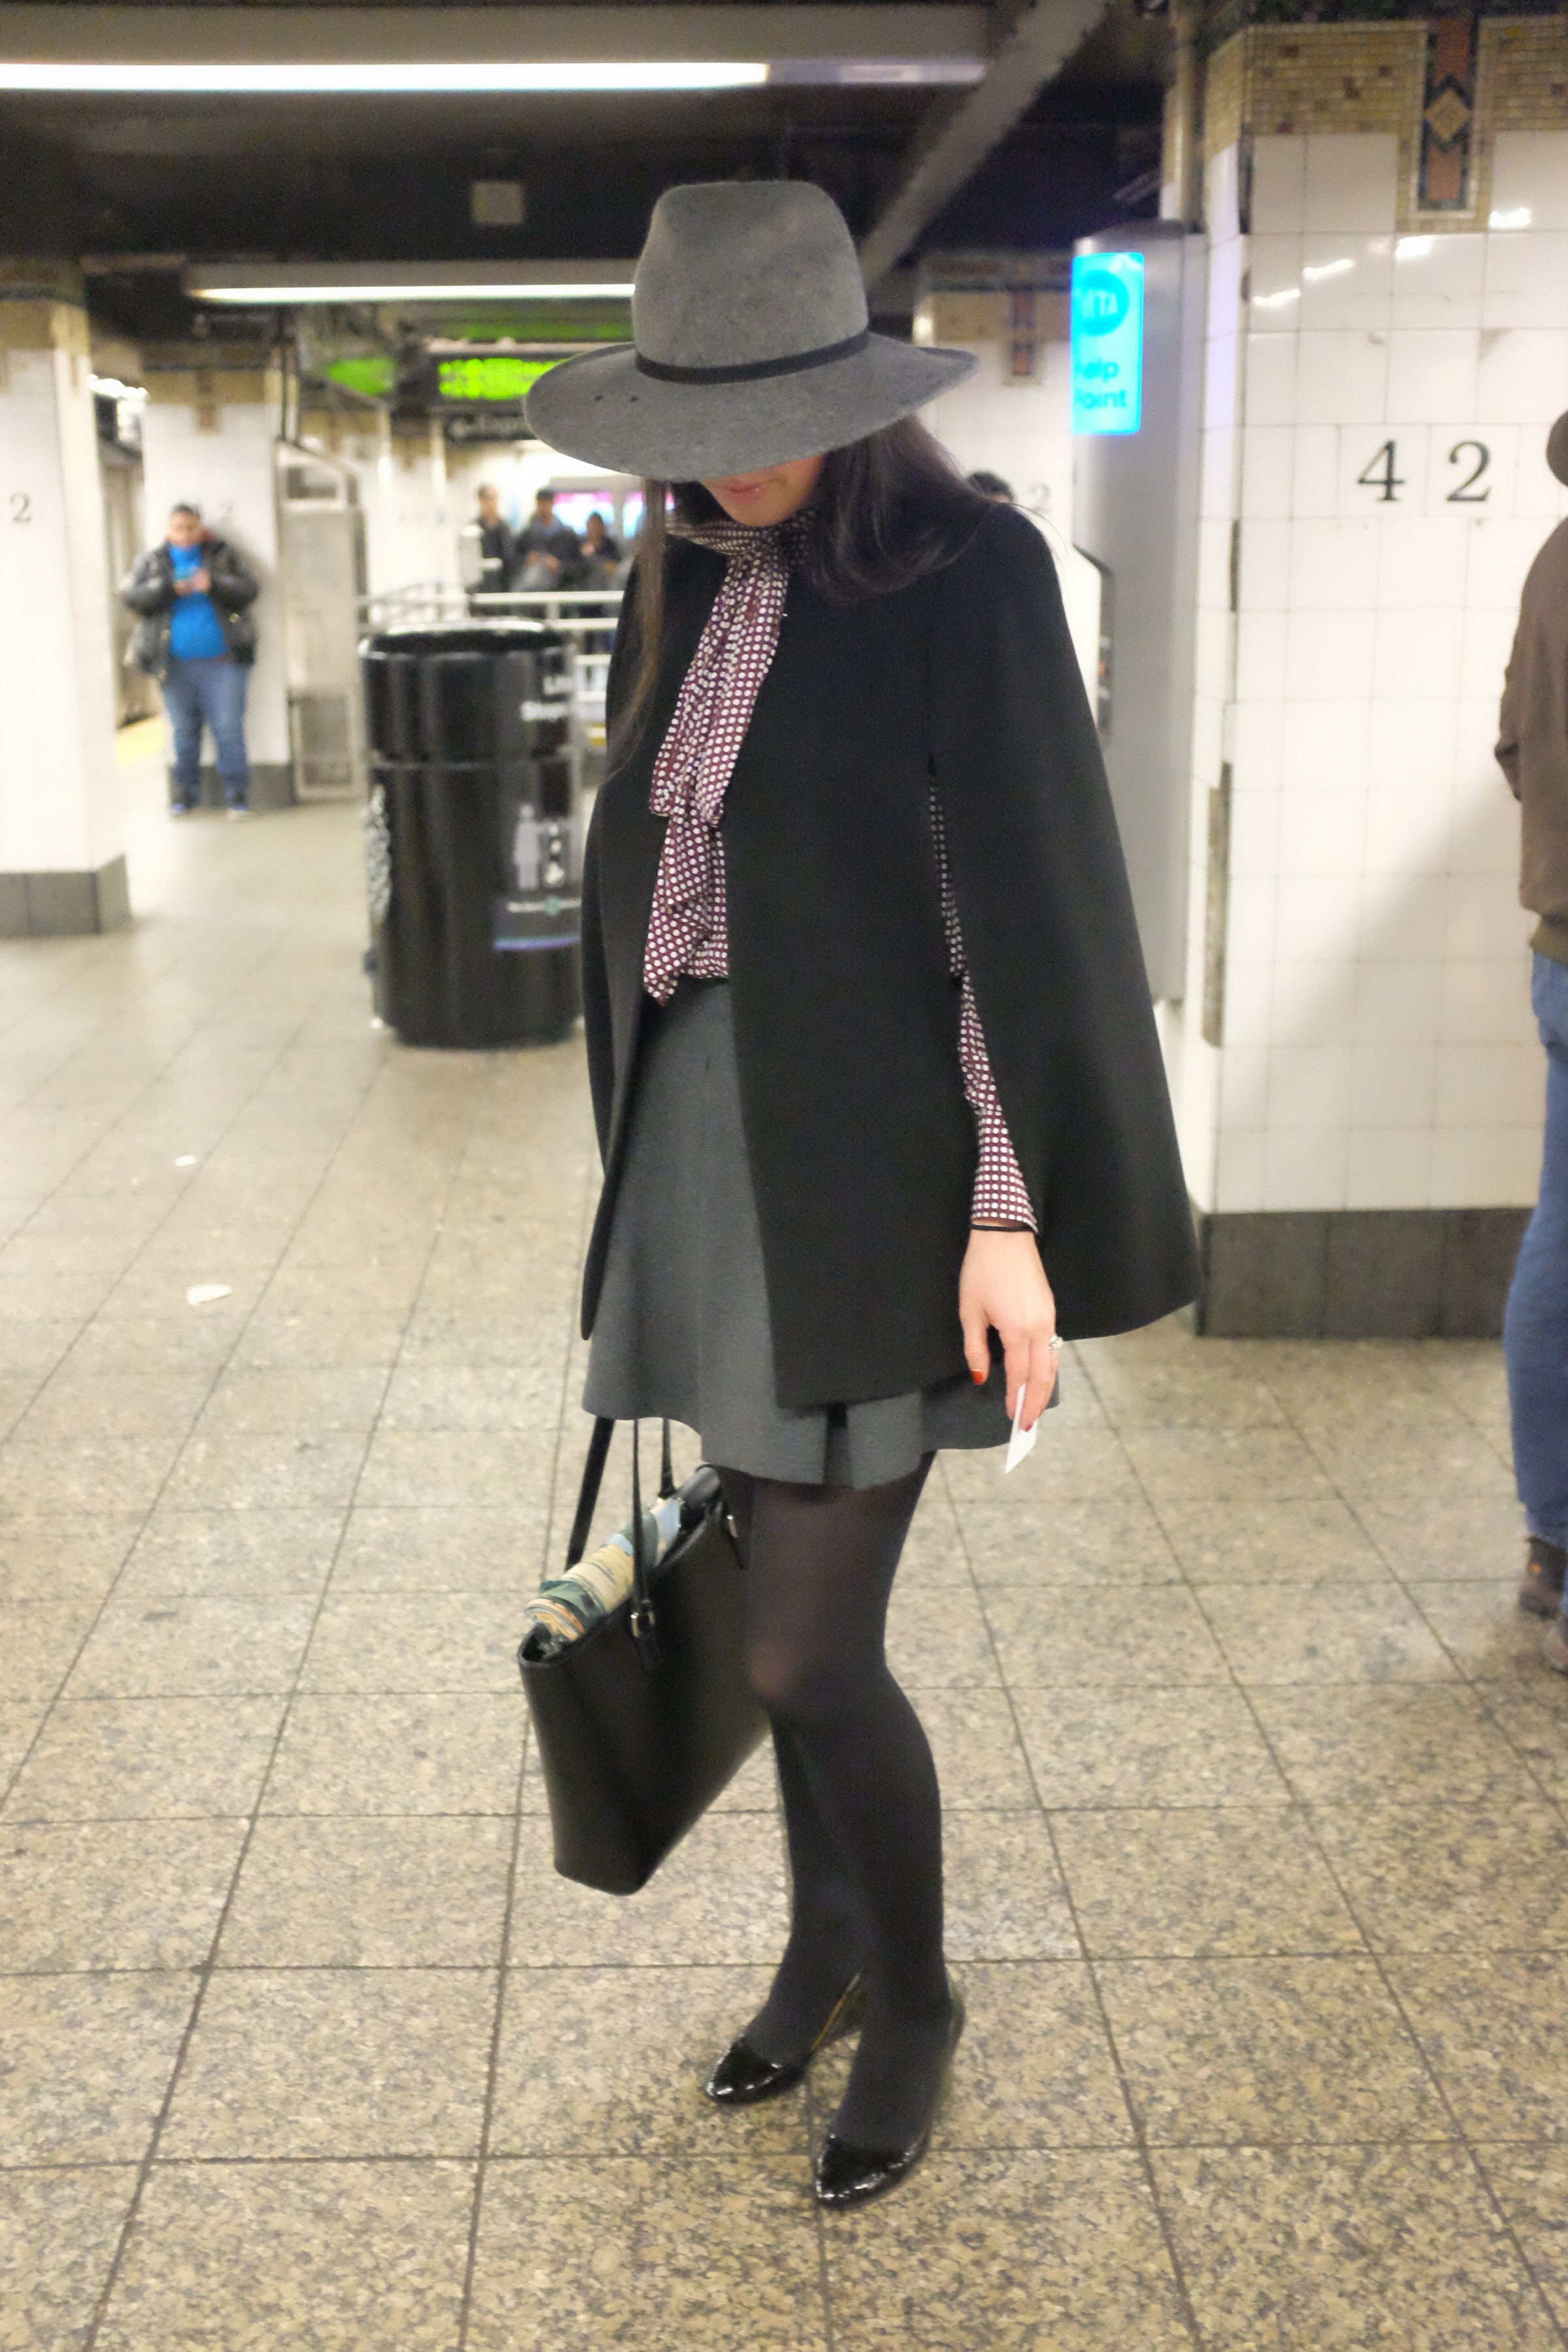 stylish outfit in 42nd street subway station